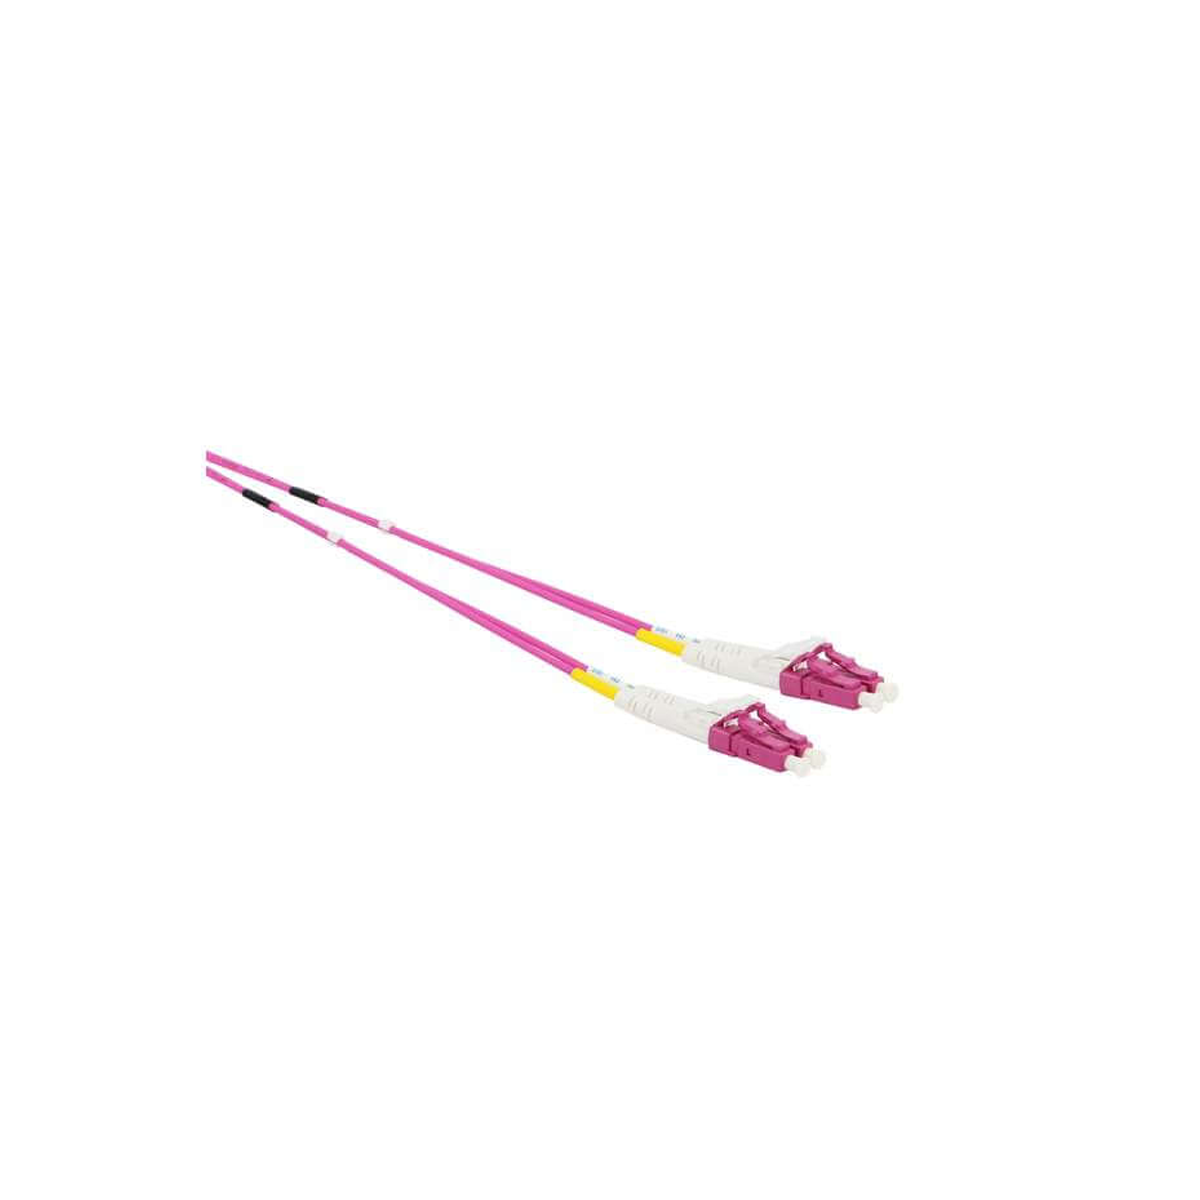 EXCEL OM4 3M LC-LC DUPLEX PATCH LEAD 50/125